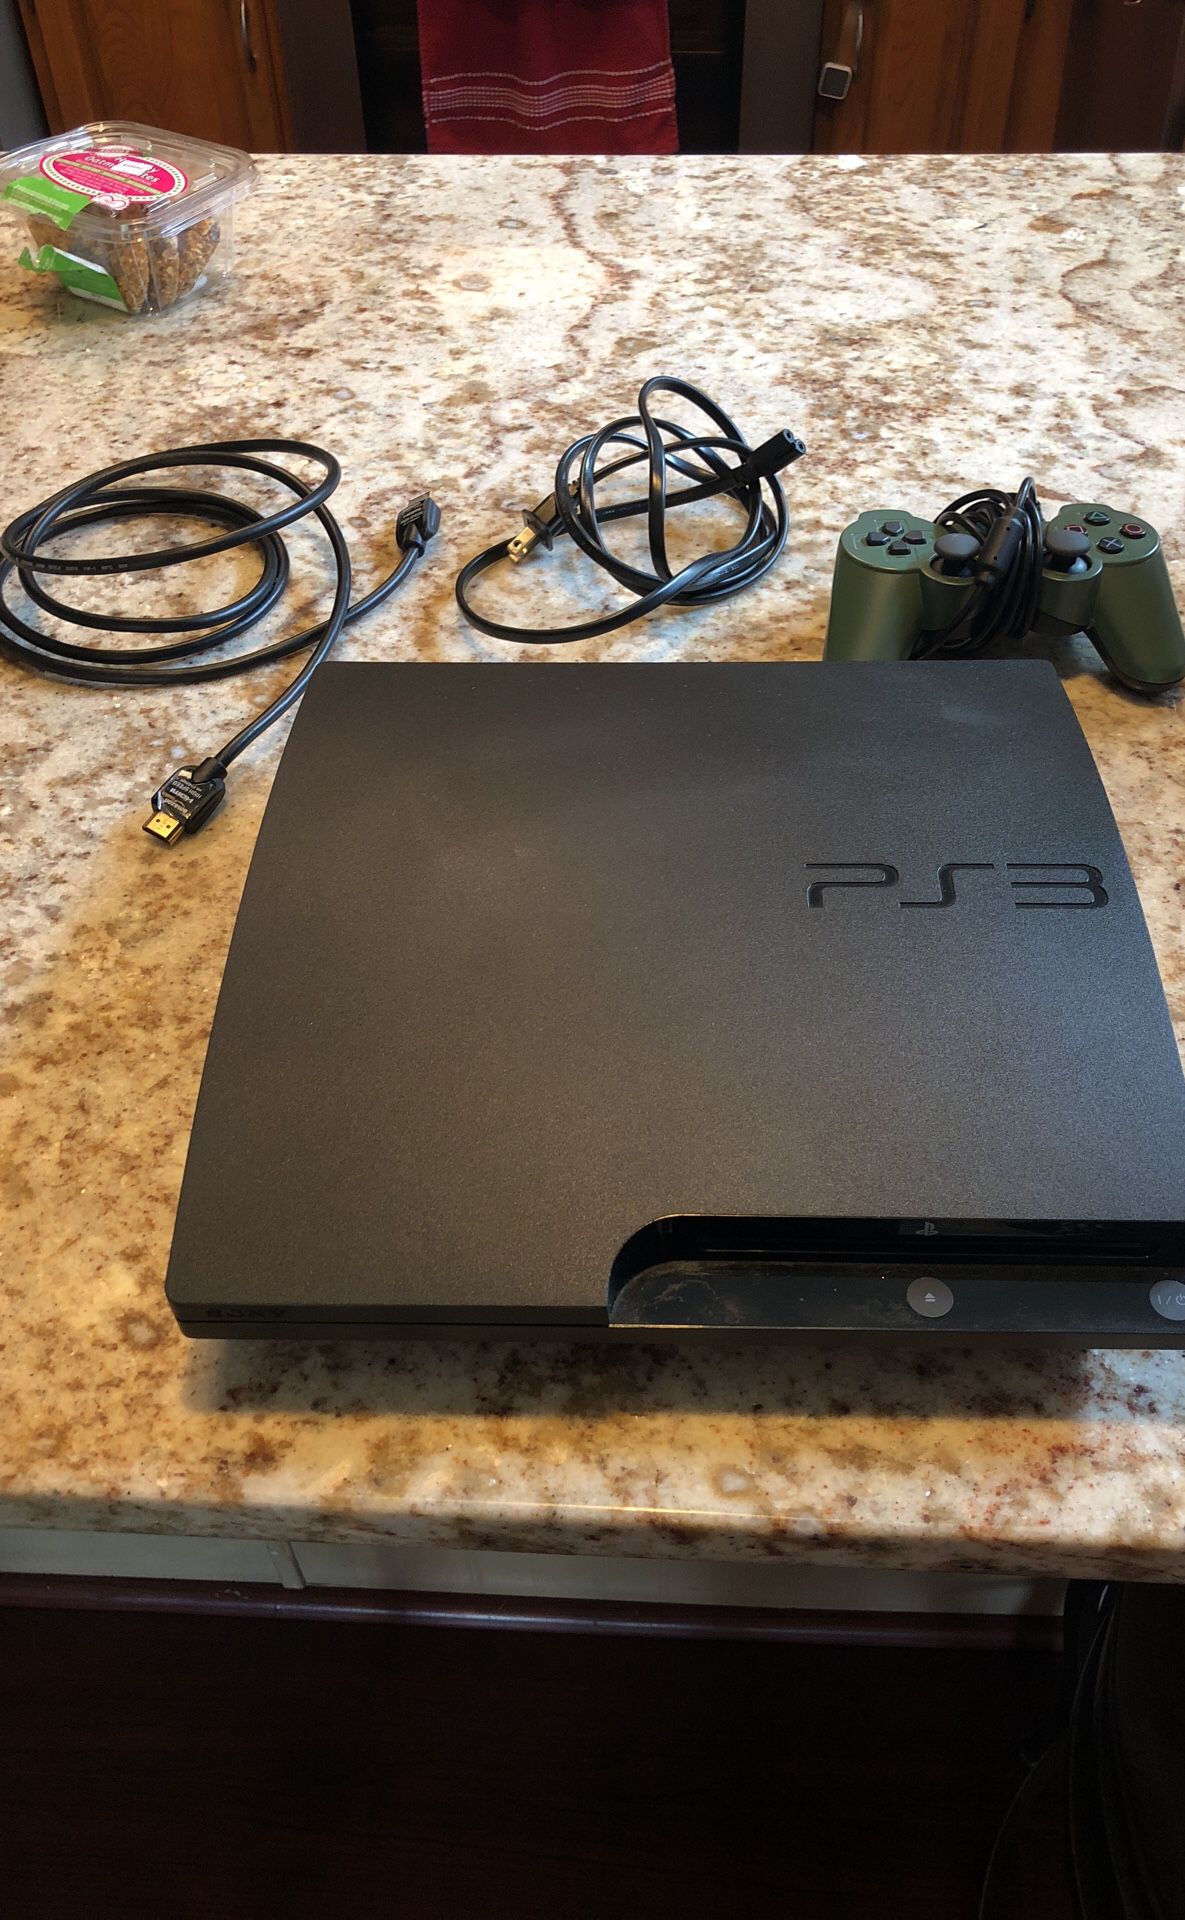 150GB PS3 bundle with amazing games